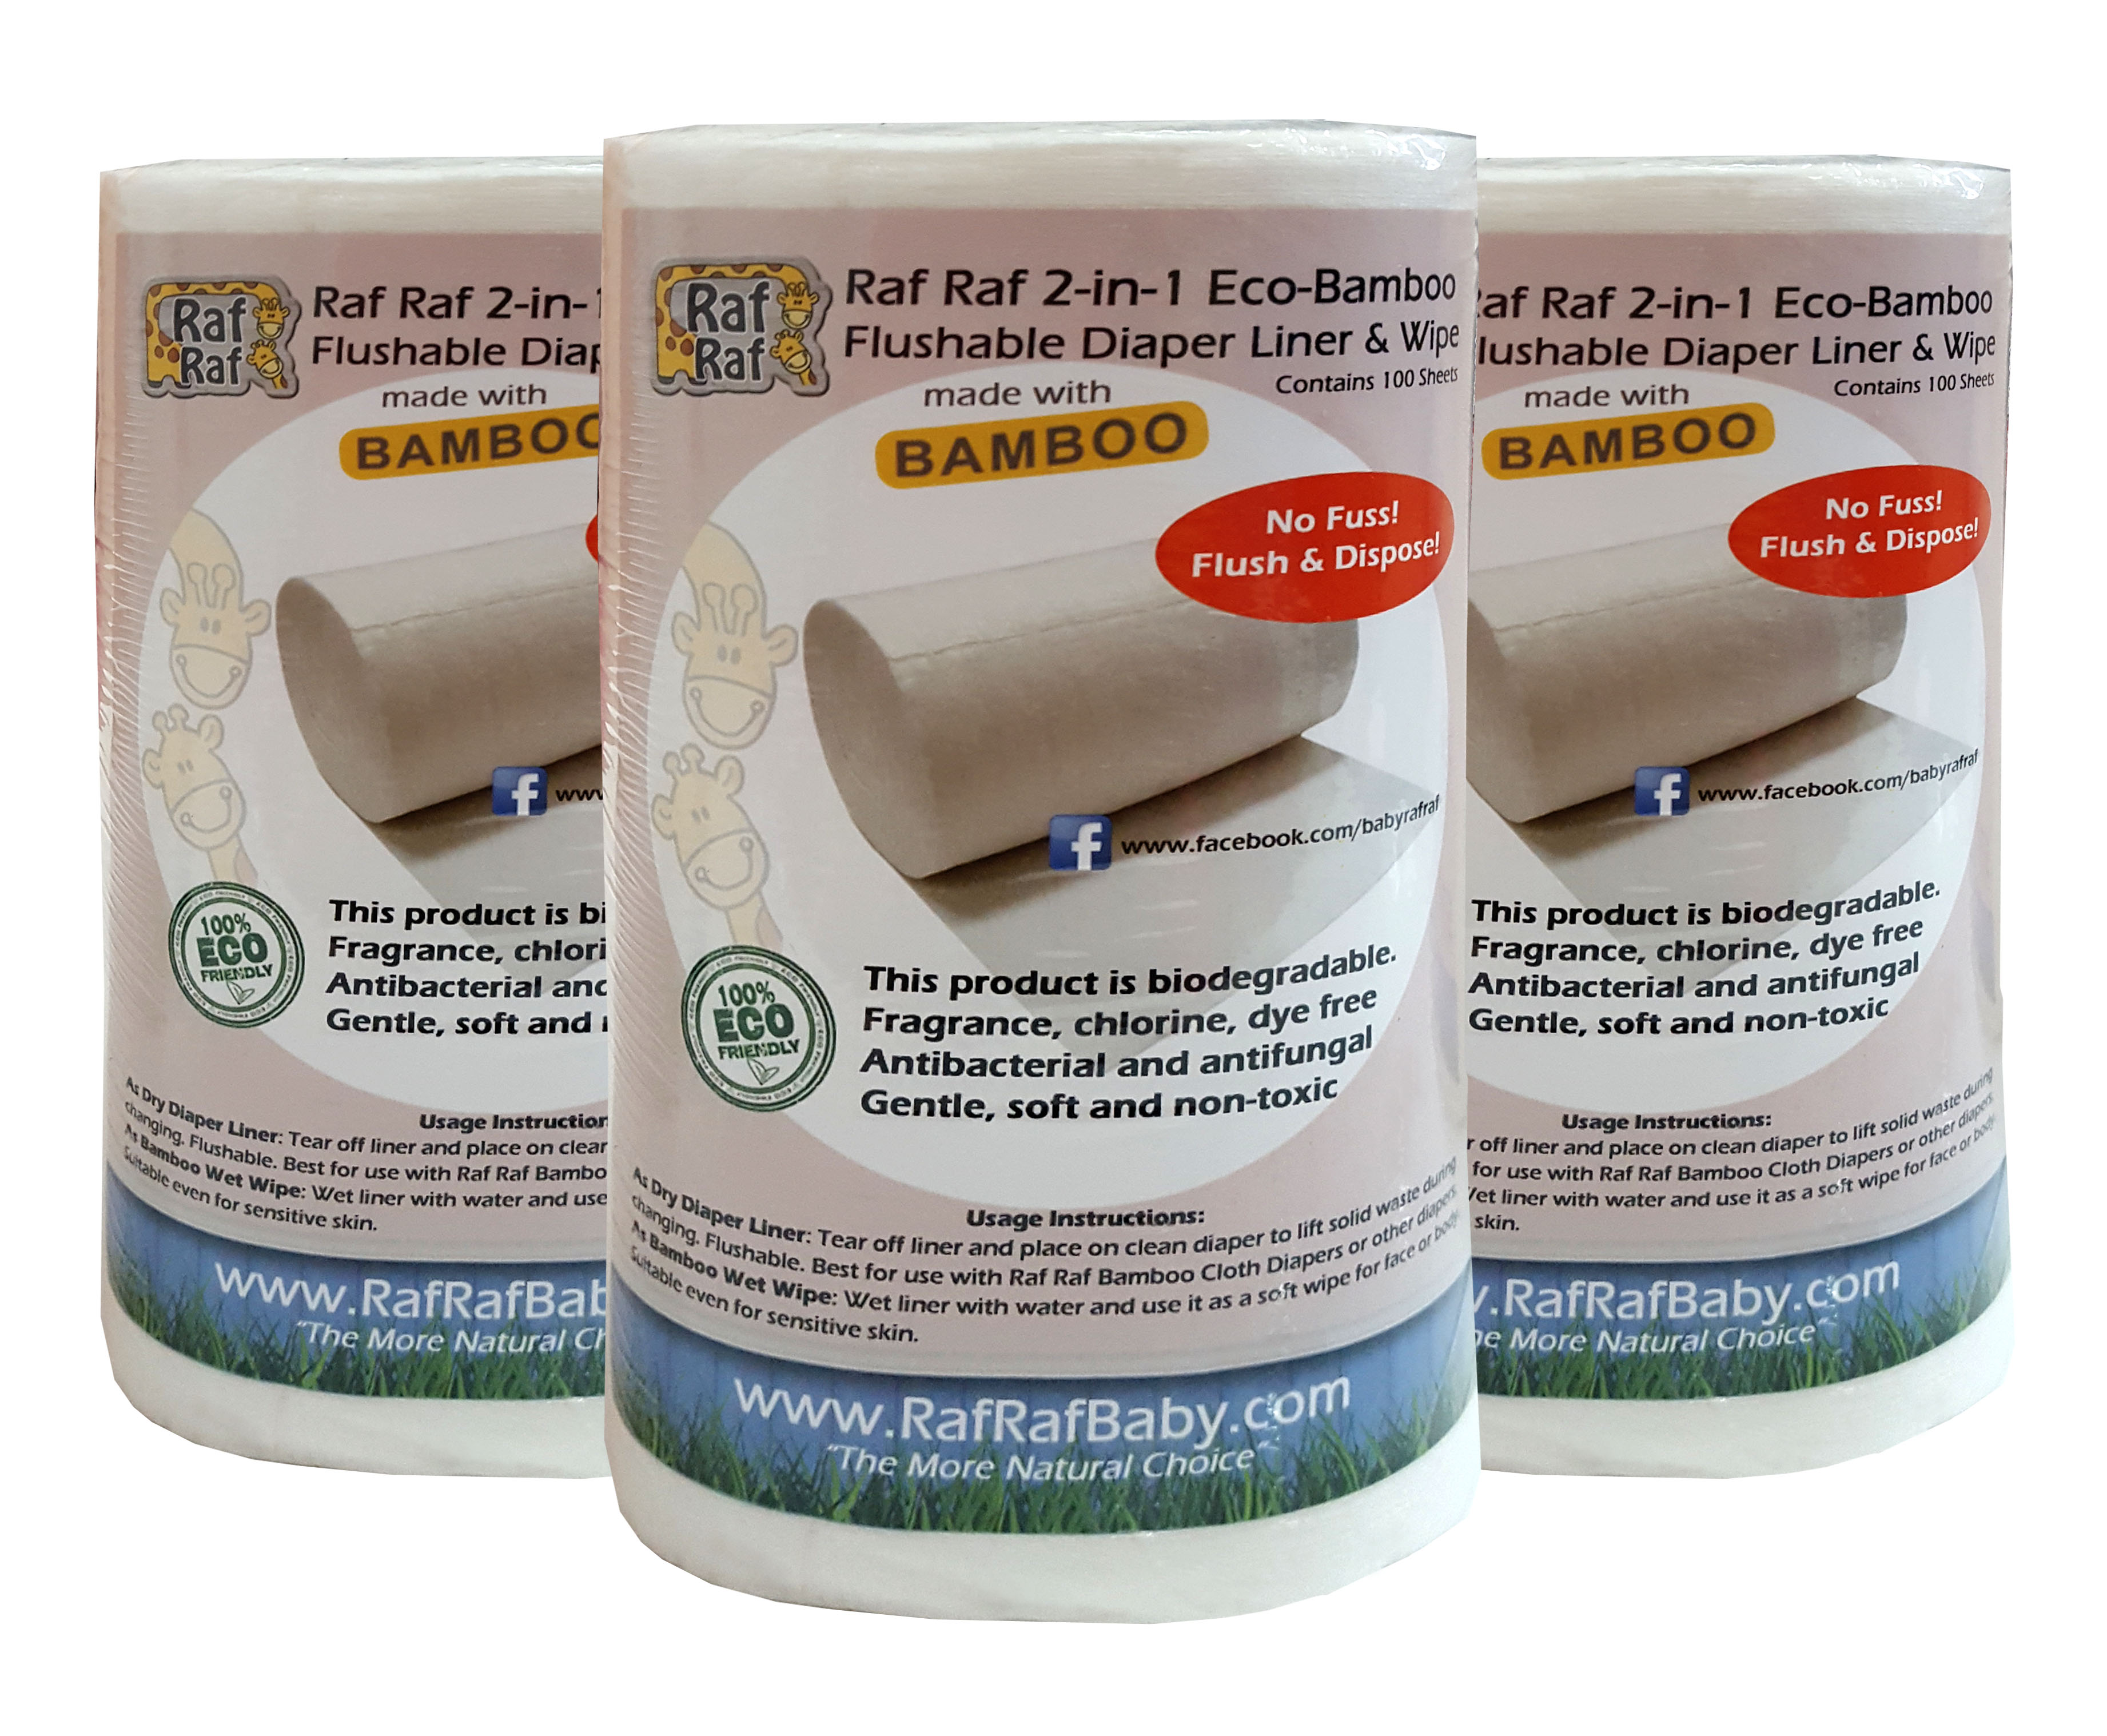 Raf Raf 2-in-1 Eco-Bamboo Flushable Diaper Liner & Wipe